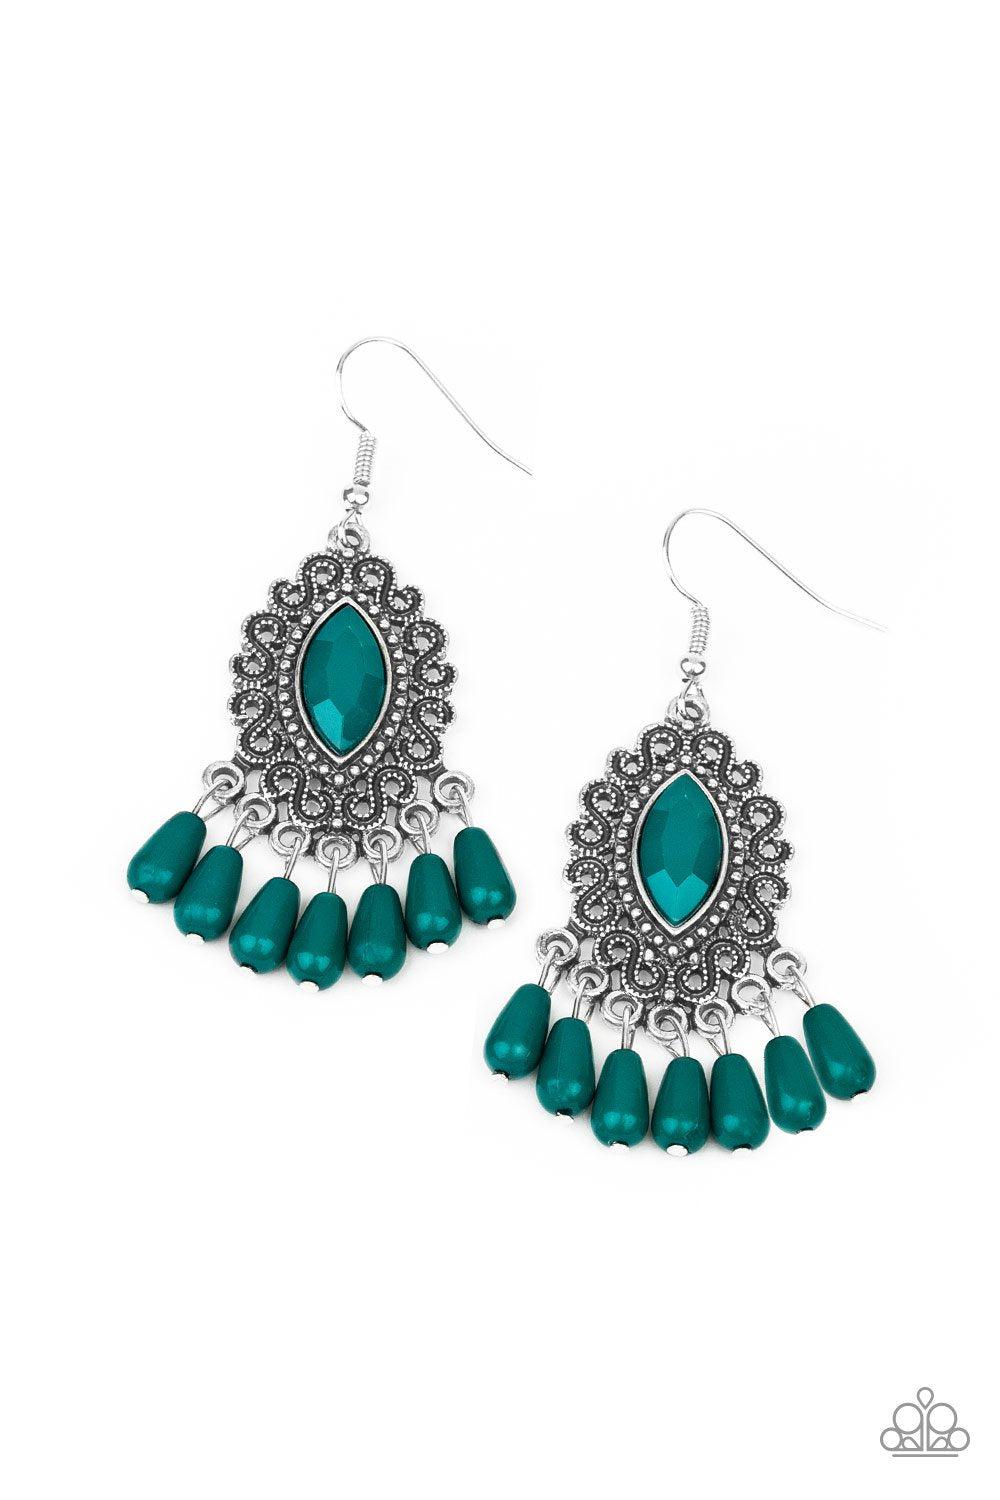 Private Villa Green and Silver Earrings - Paparazzi Accessories-CarasShop.com - $5 Jewelry by Cara Jewels